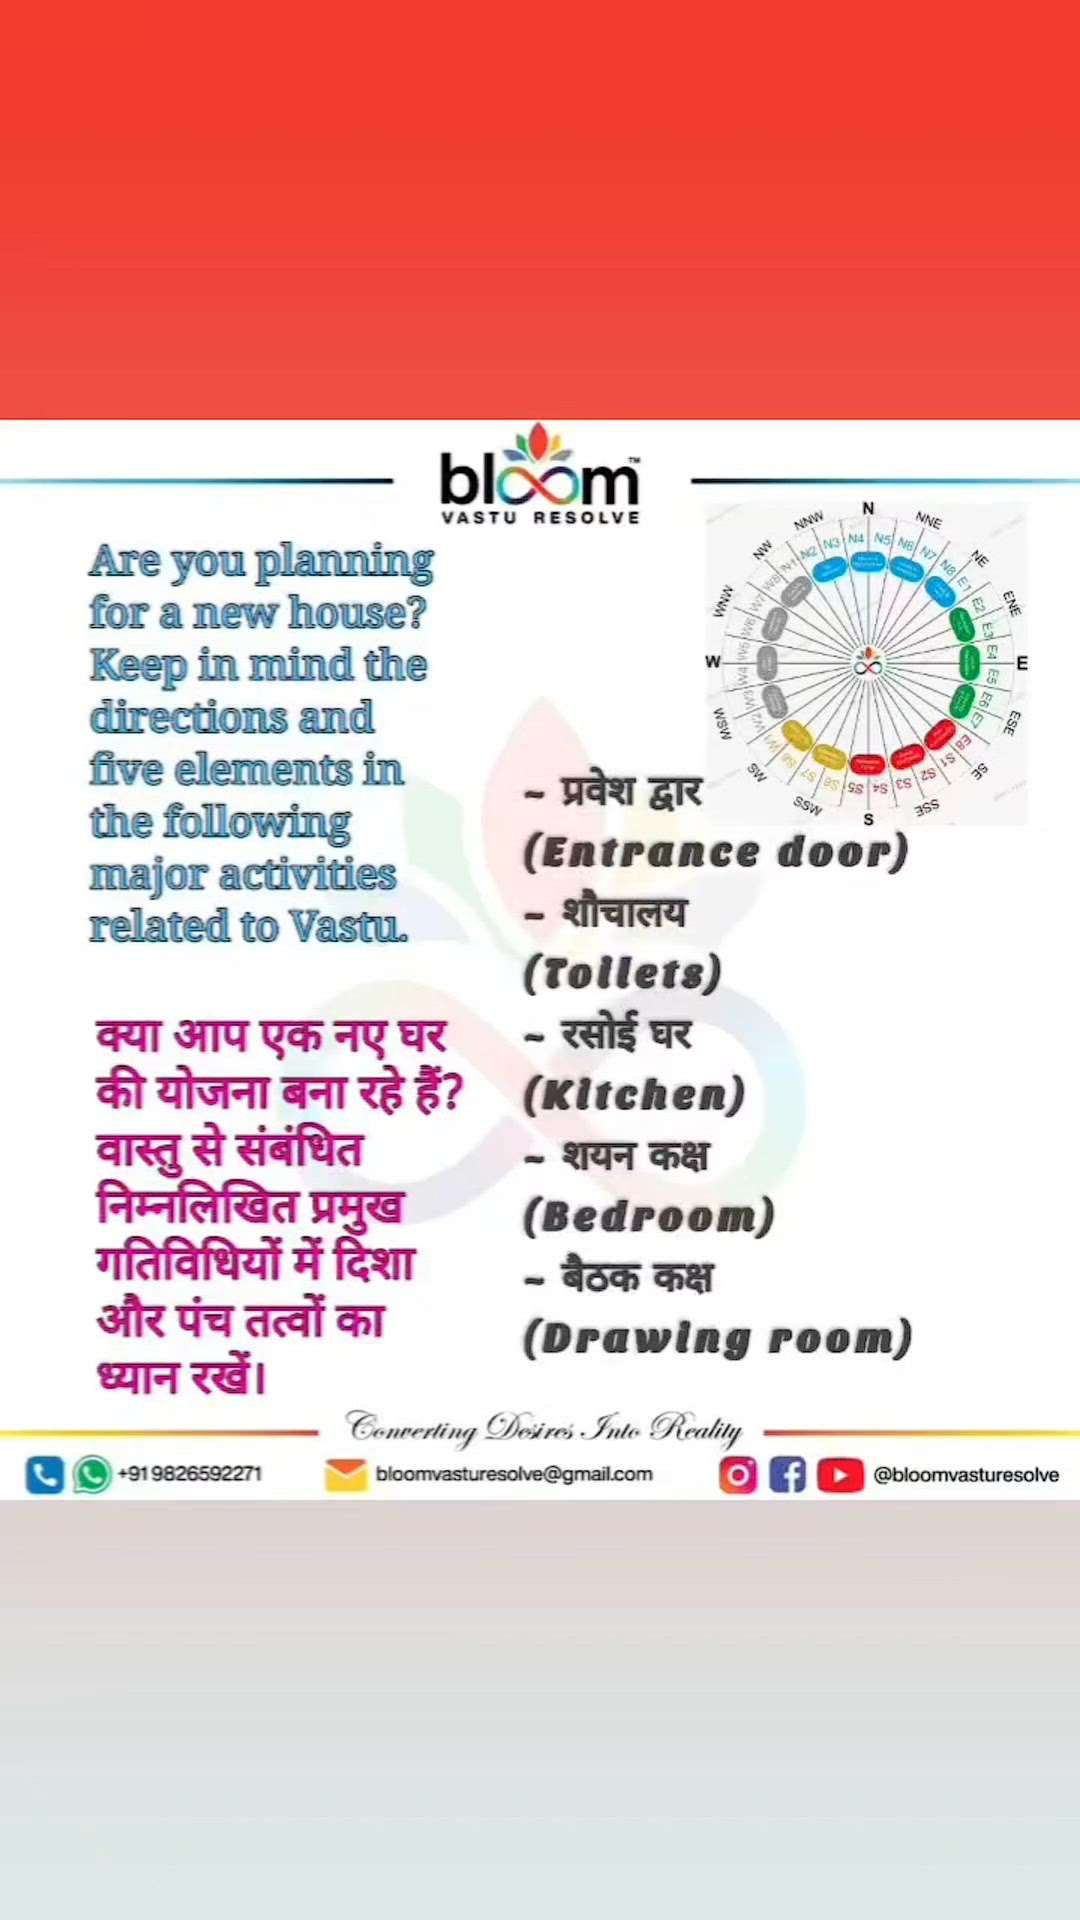 Your queries and comments are always welcome.
For more Vastu please follow @bloomvasturesolve
on YouTube, Instagram & Facebook
.
.
For personal consultation, feel free to contact certified MahaVastu Expert through
M - 9826592271
Or
bloomvasturesolve@gmail.com
#vastu #वास्तु #mahavastu #mahavastuexpert #bloomvasturesolve  #vastureels #vastulogy #vastuexpert  #vasturemedies  #vastuforhome #vastuforpeace #vastudosh #numerology #vastuforhome  #16zones  #entrance #vastuforbusiness